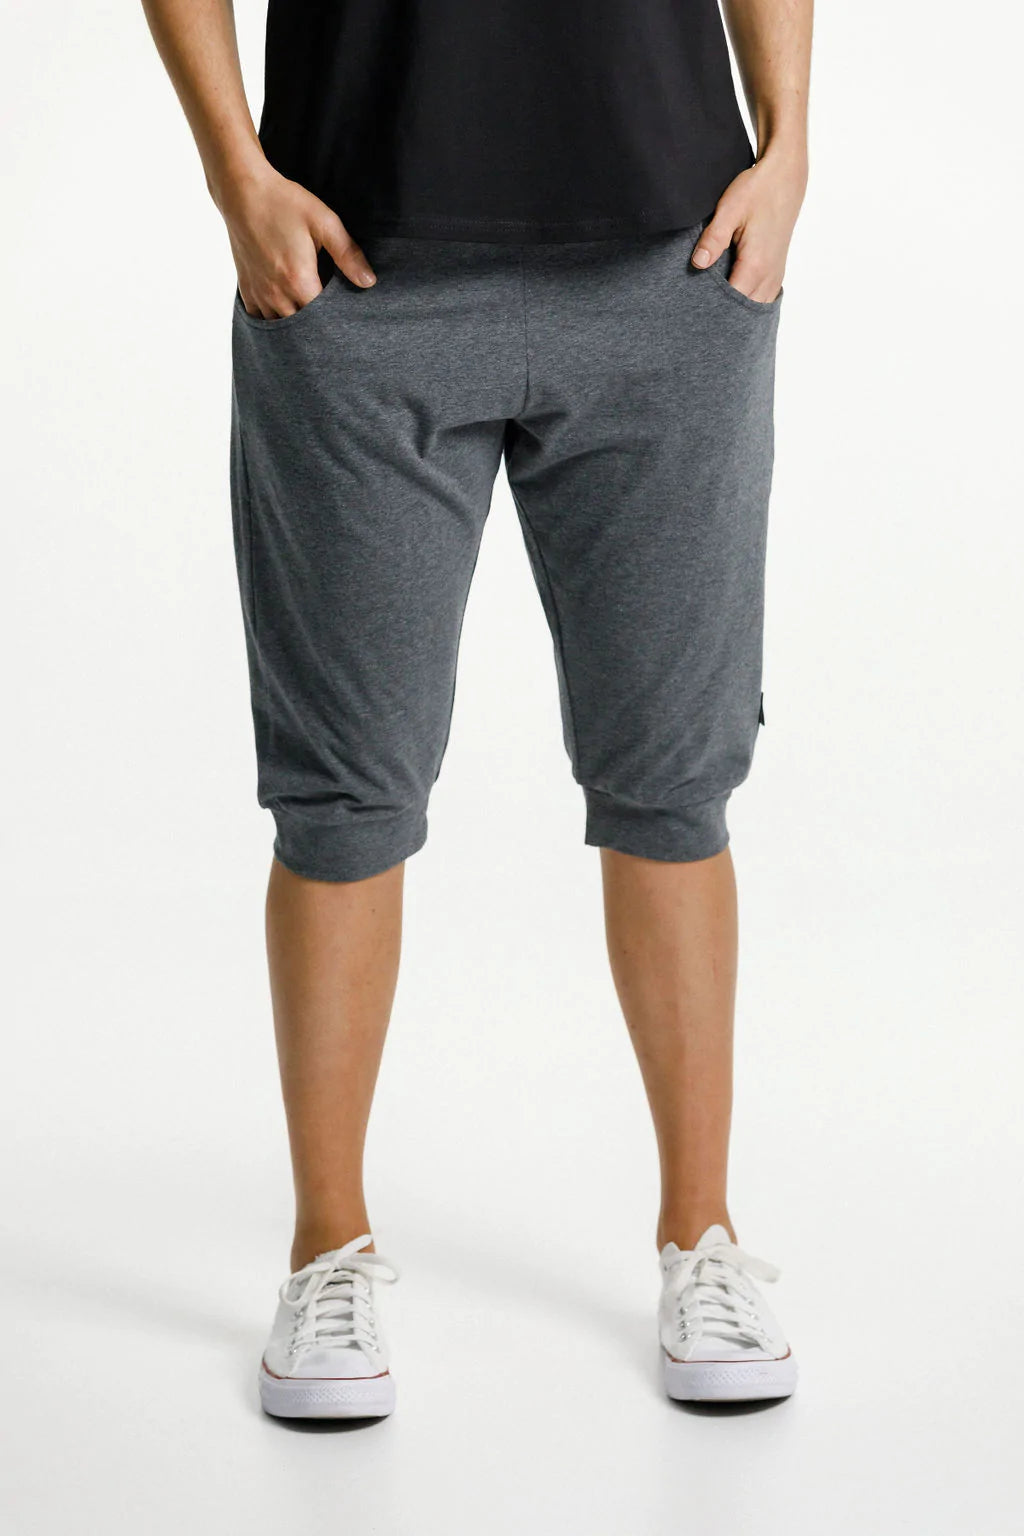 HomeLee 3/4 APARTMENT PANTS - Charcoal with Matte Black X